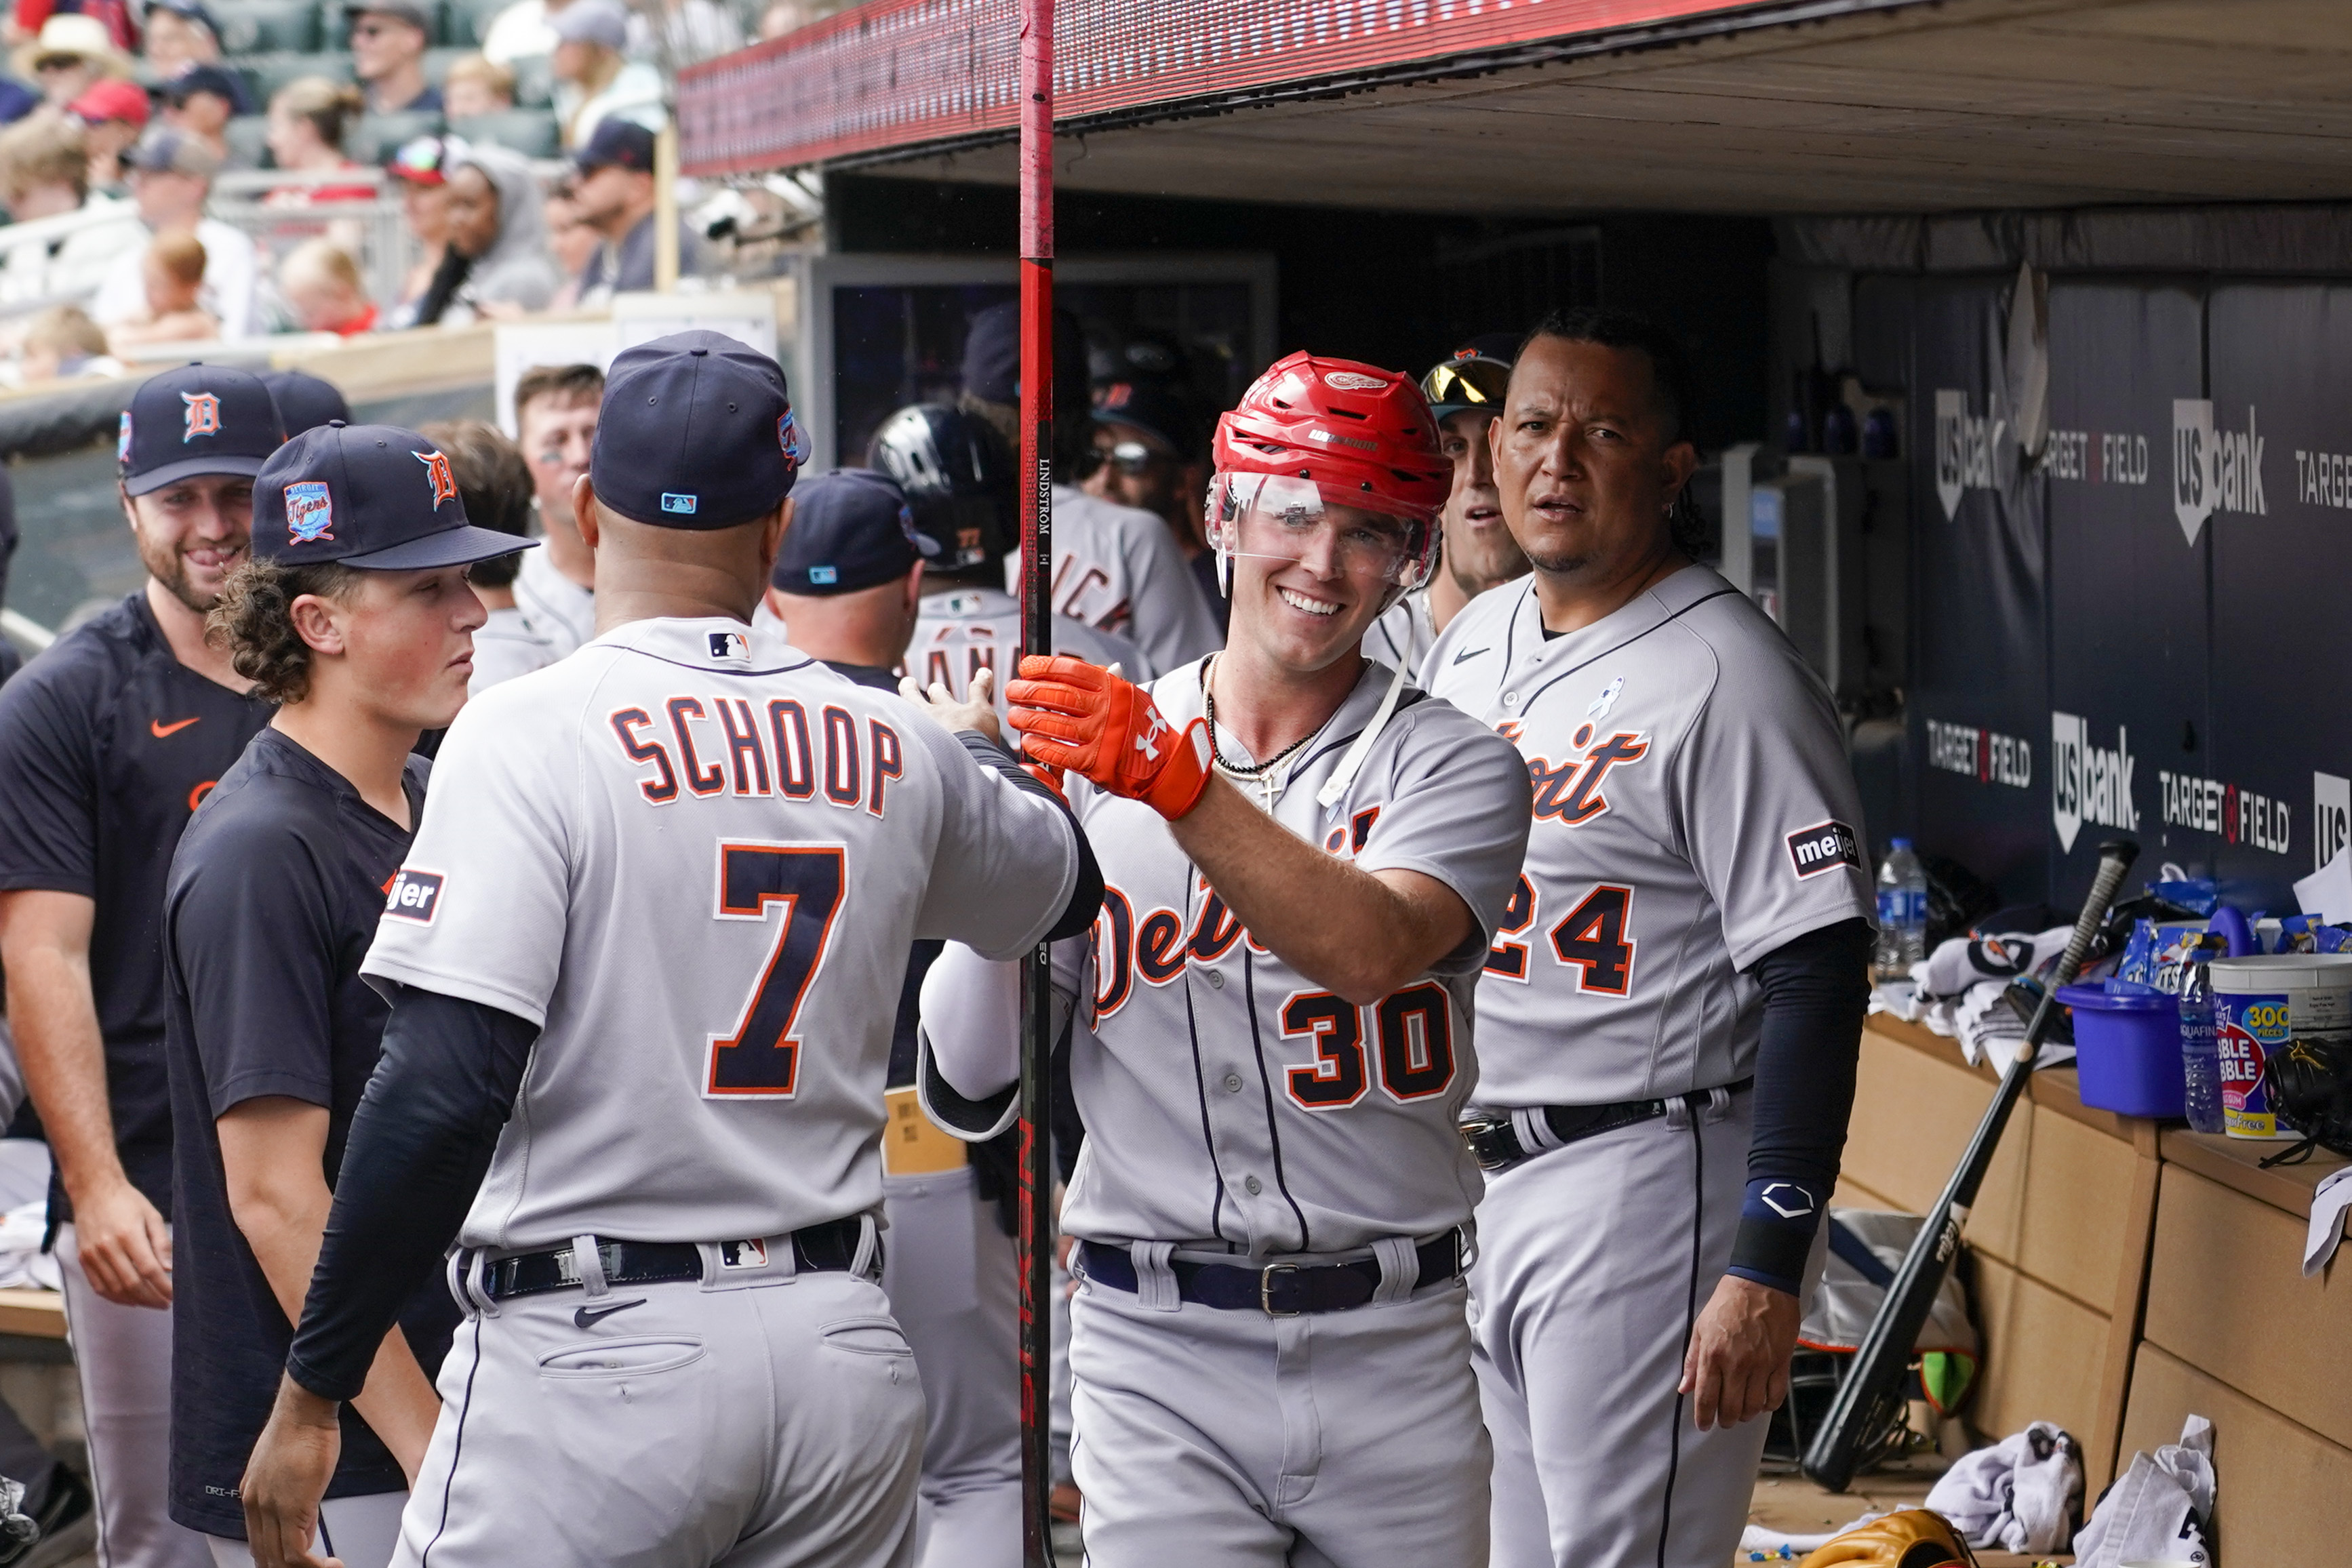 Tigers throw it away: Wild toss in 9th gives Twins crazy win